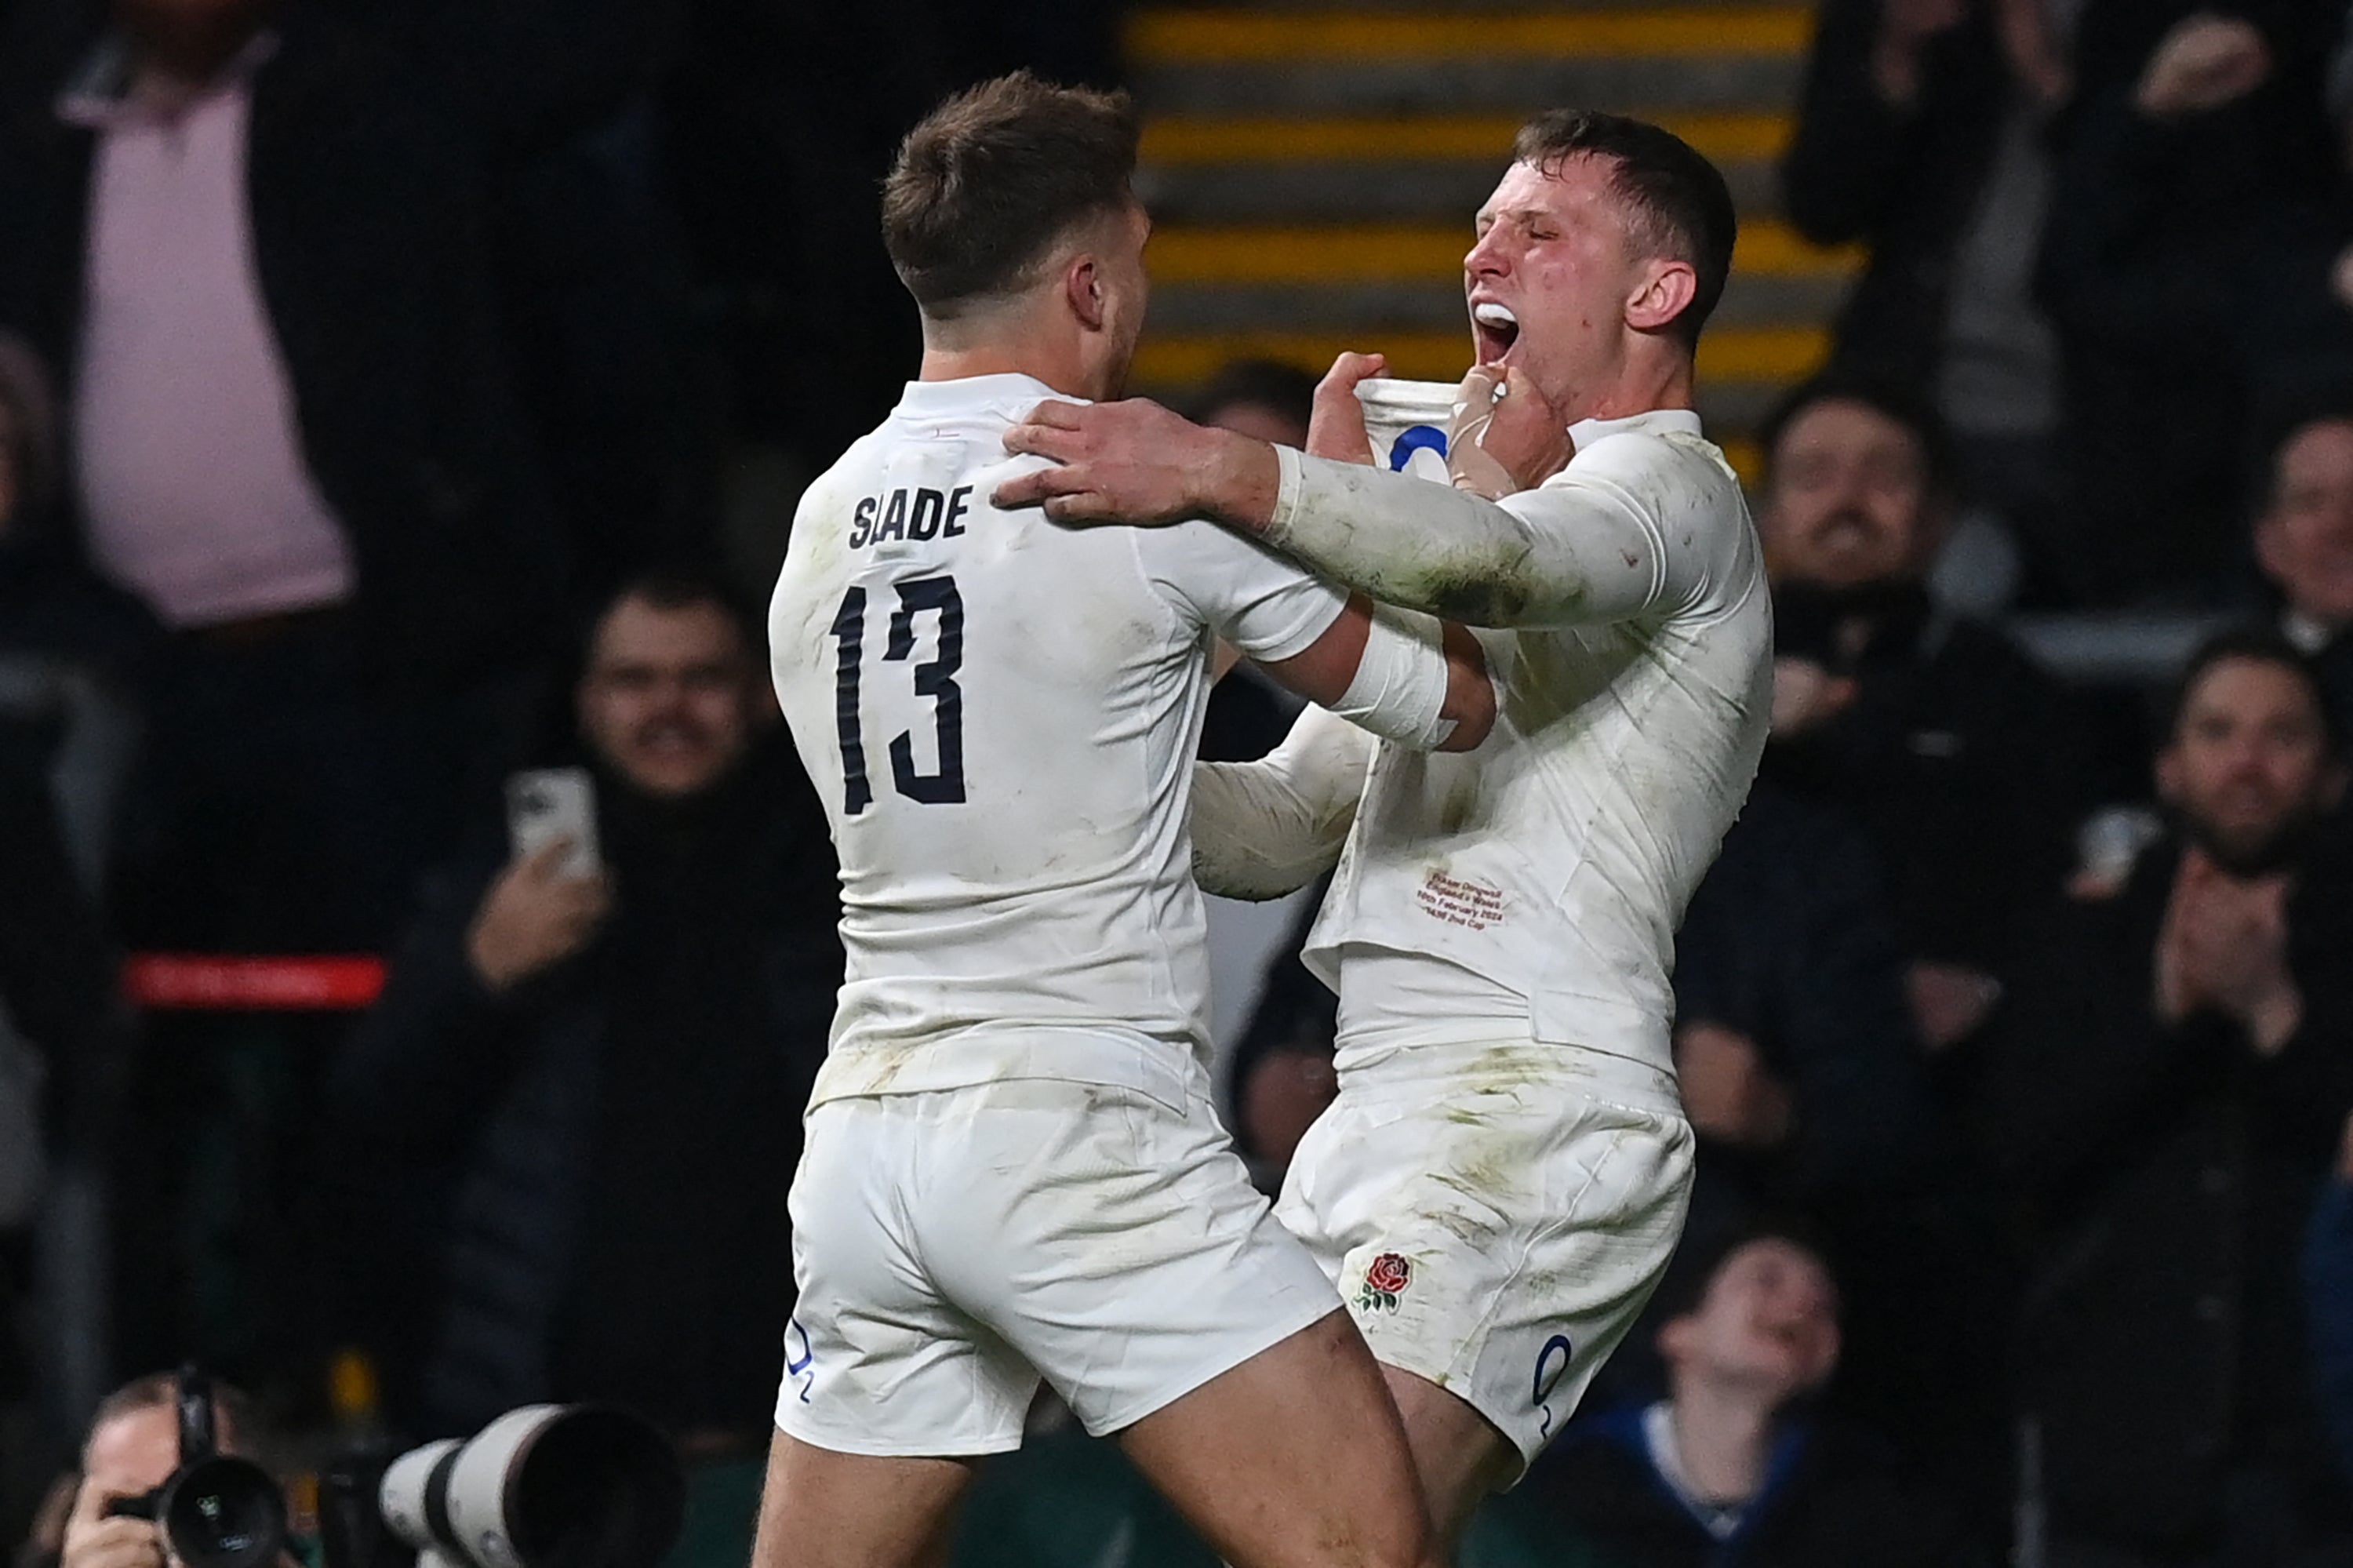 Fraser Dingwall (right) celebrates with Henry Slade after scoring England’s second try as the home side snatched victory at Twickenham